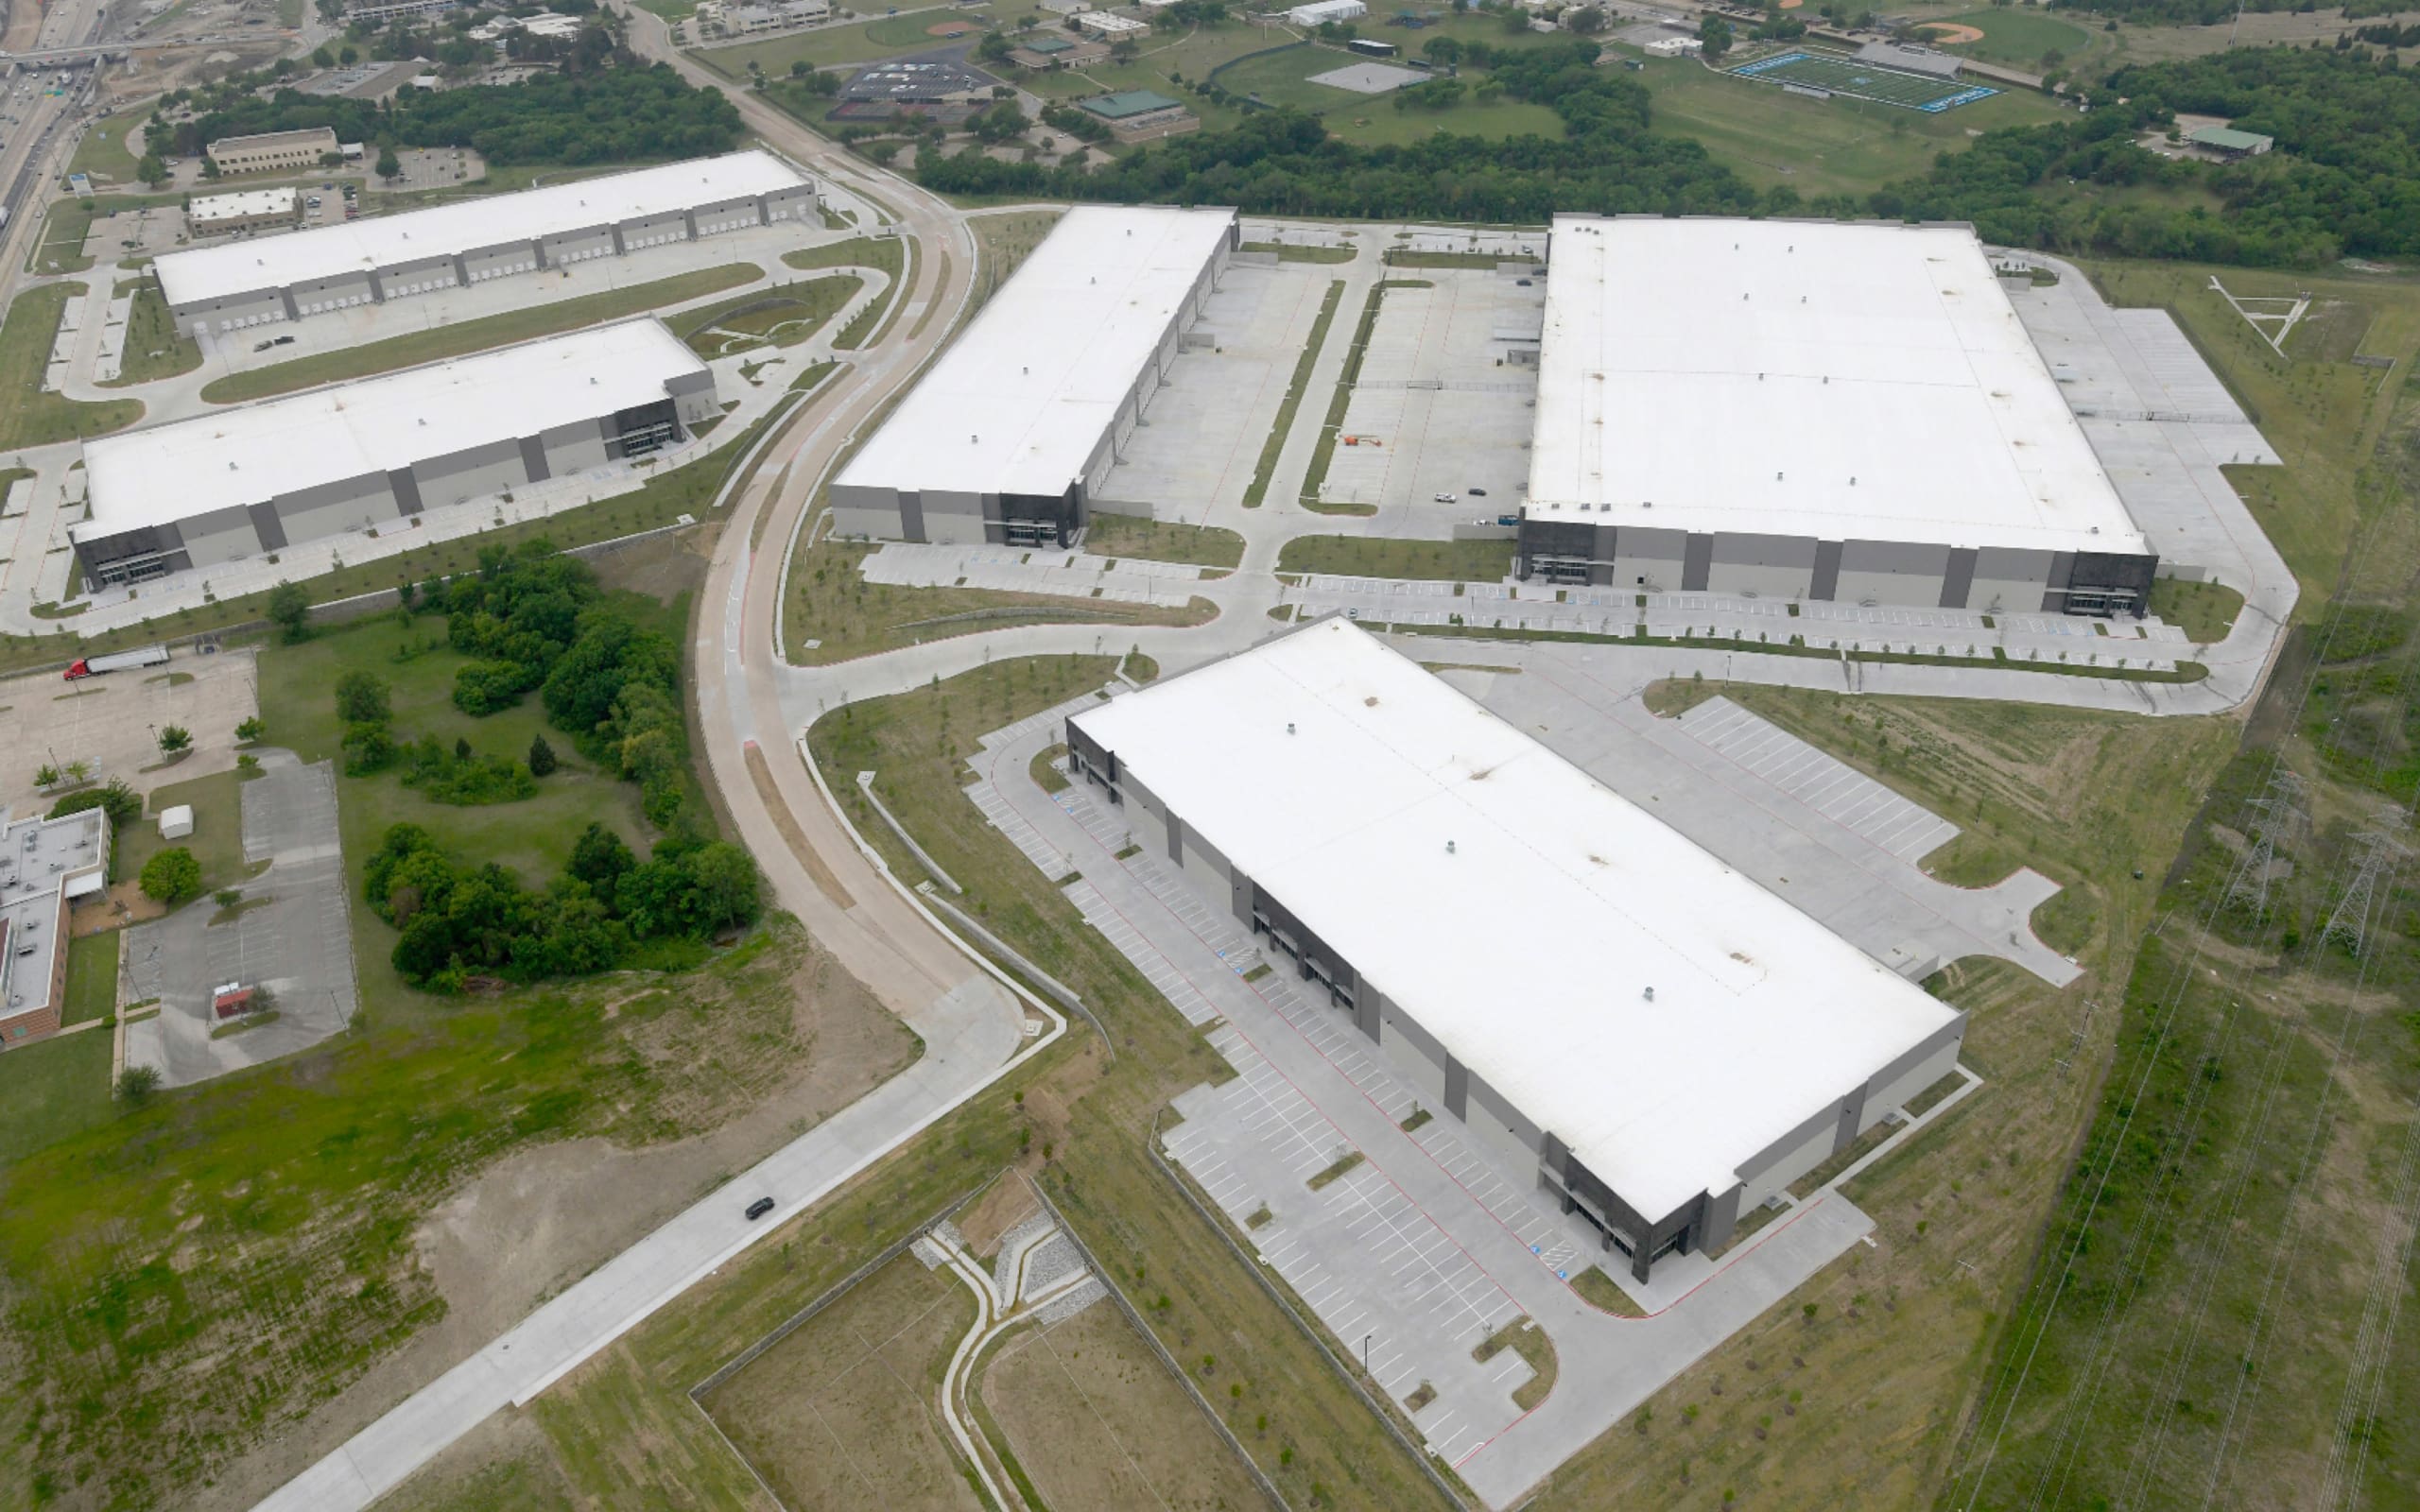 Aerial view of an industrial park with several large warehouse buildings, parking lots, and surrounding green spaces. Roads connect the buildings within the complex.